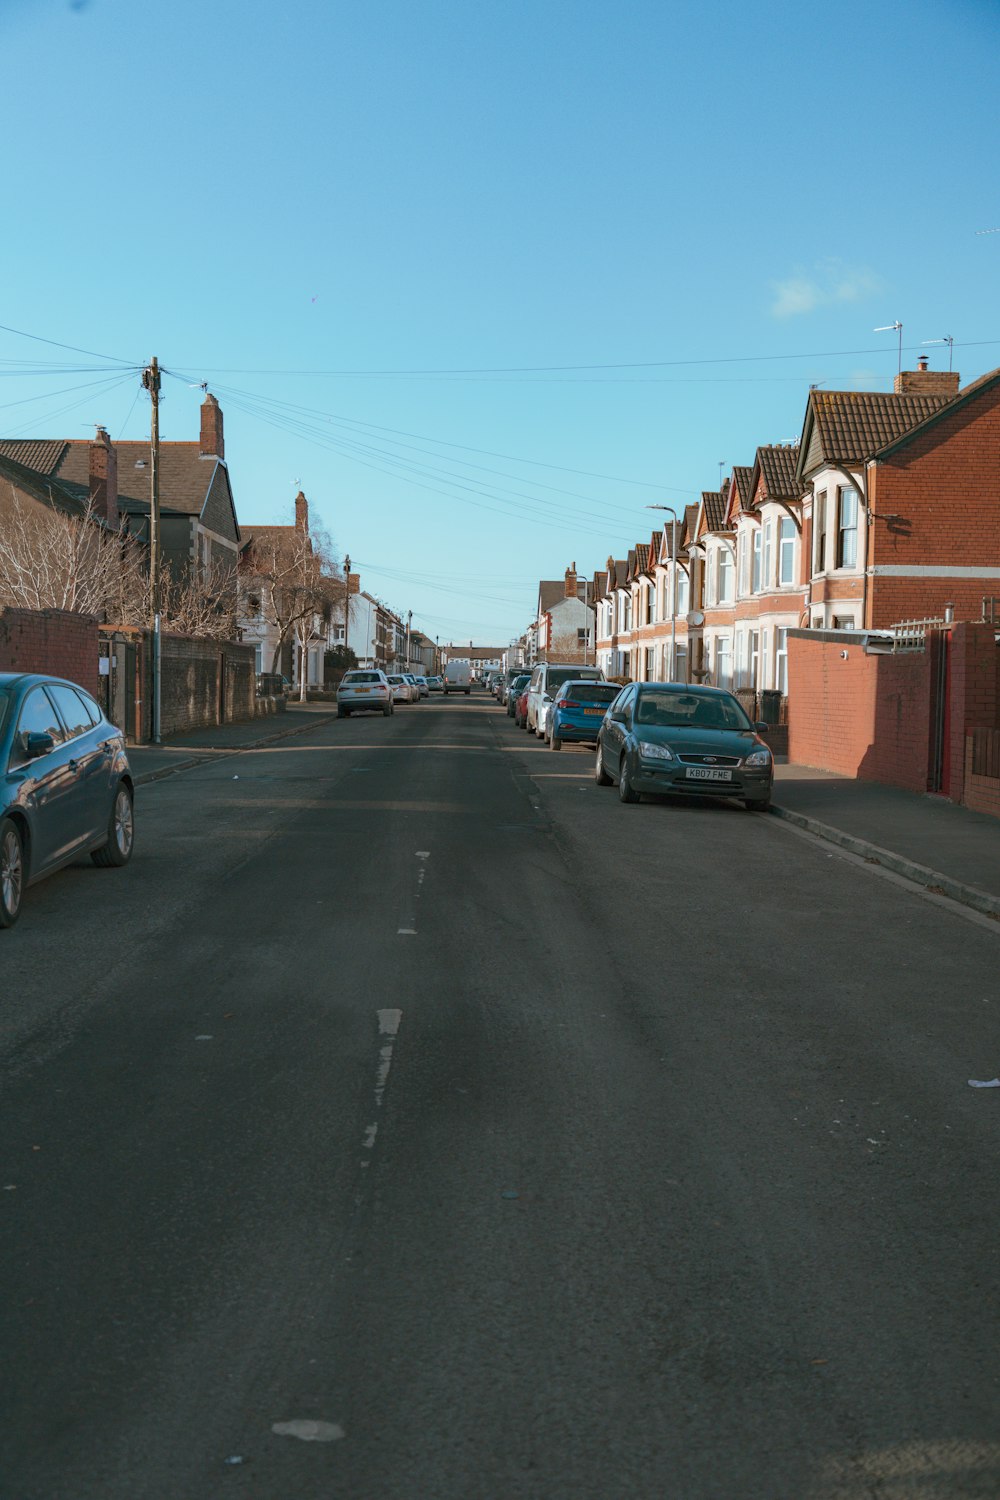 cars parked on the side of a road next to a row of houses